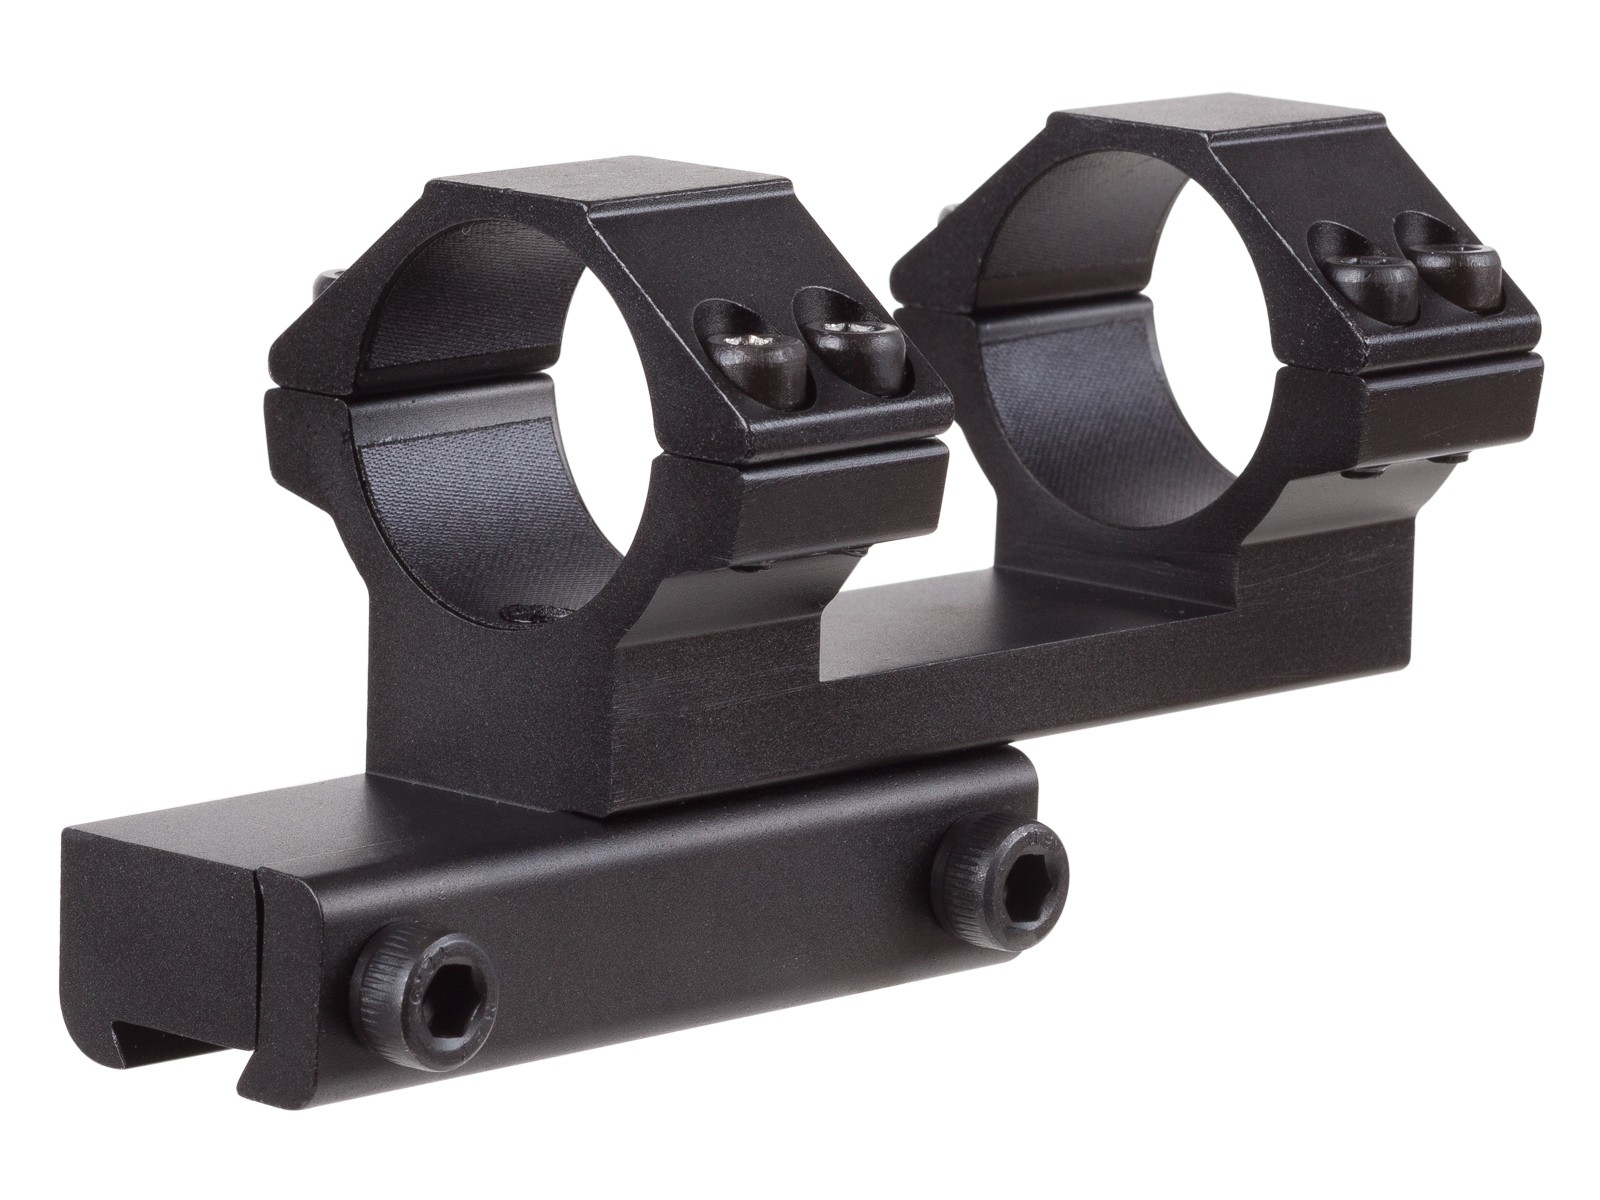 Leapers Accushot 1-Pc Bi-directional Offset Mount w/1" Rings, High, 11mm Dovetail